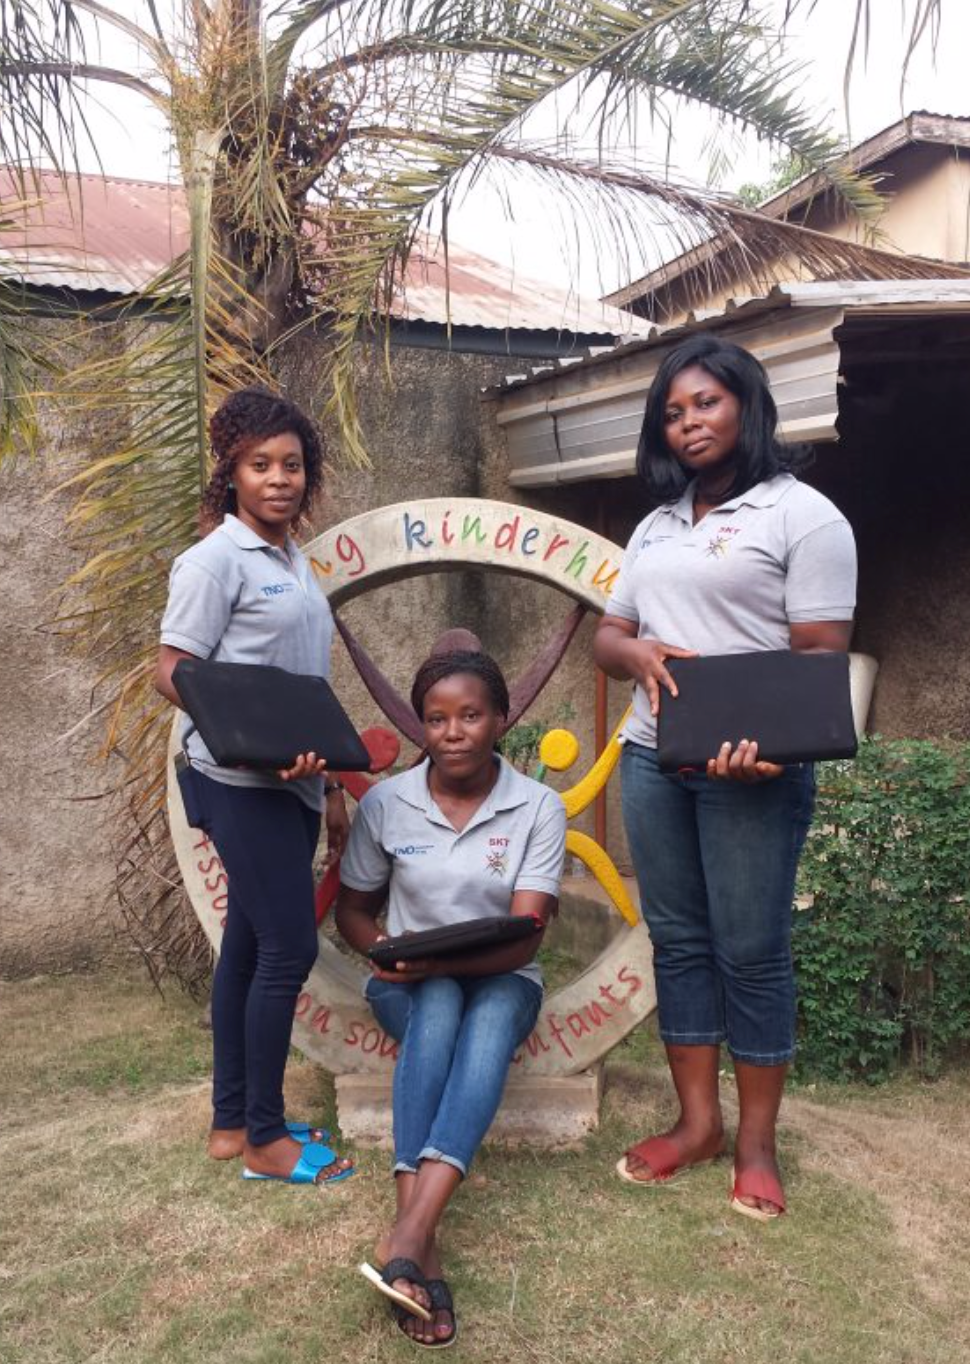 Three of the data-assistants who helped to digitize the paper files. Reproduced with permission from Stichting Kinderhulp Togo https://www.kinderhulp-togo.nl.